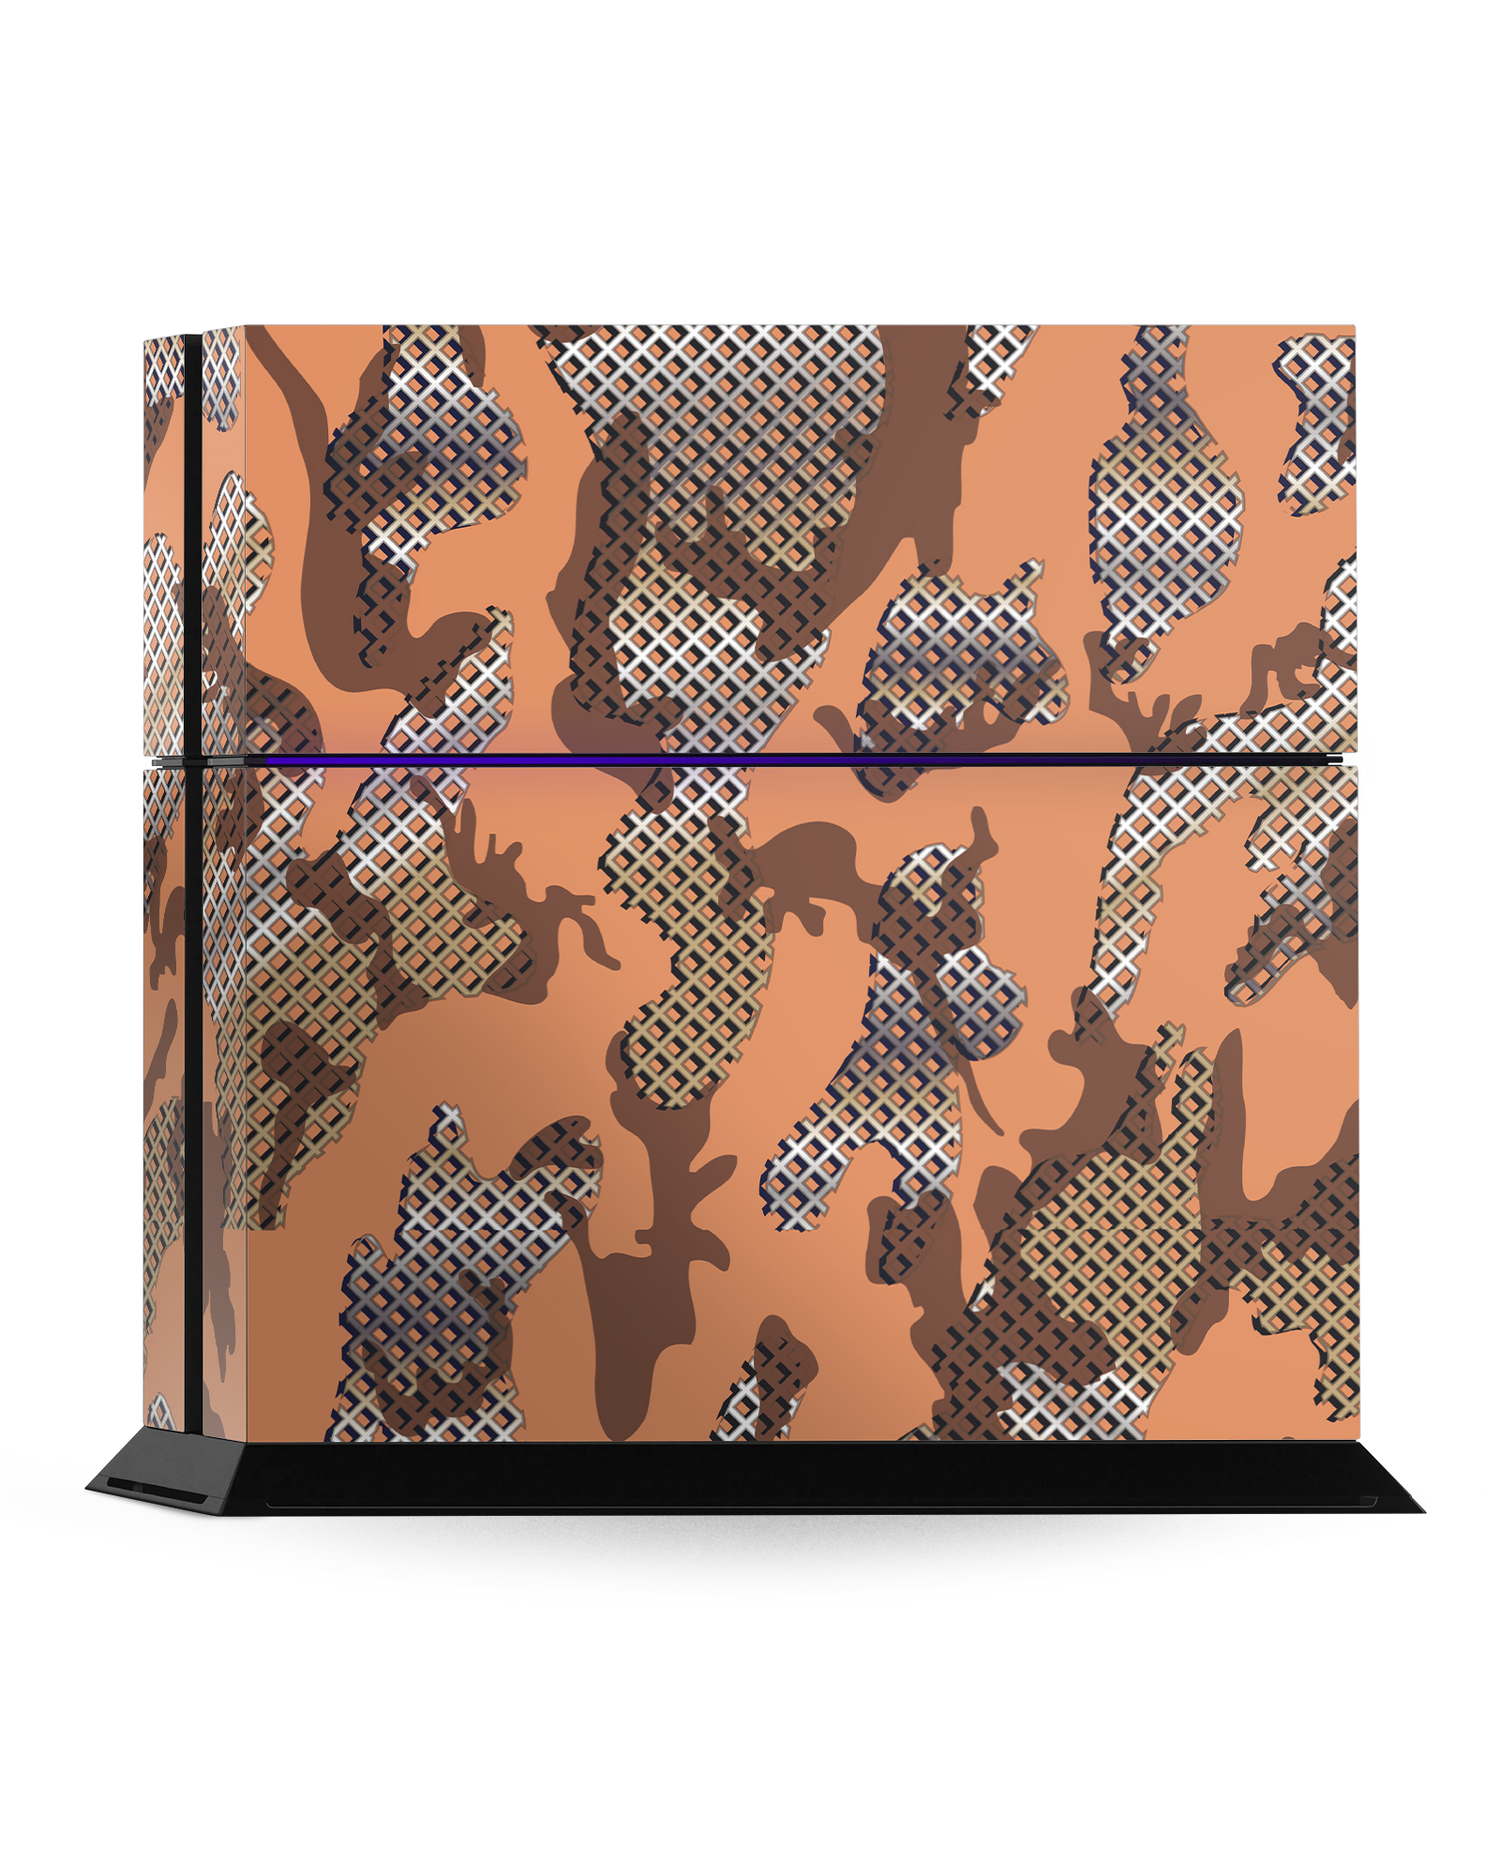 Fall Camo IV Console Skin for Sony PlayStation 4: Standing